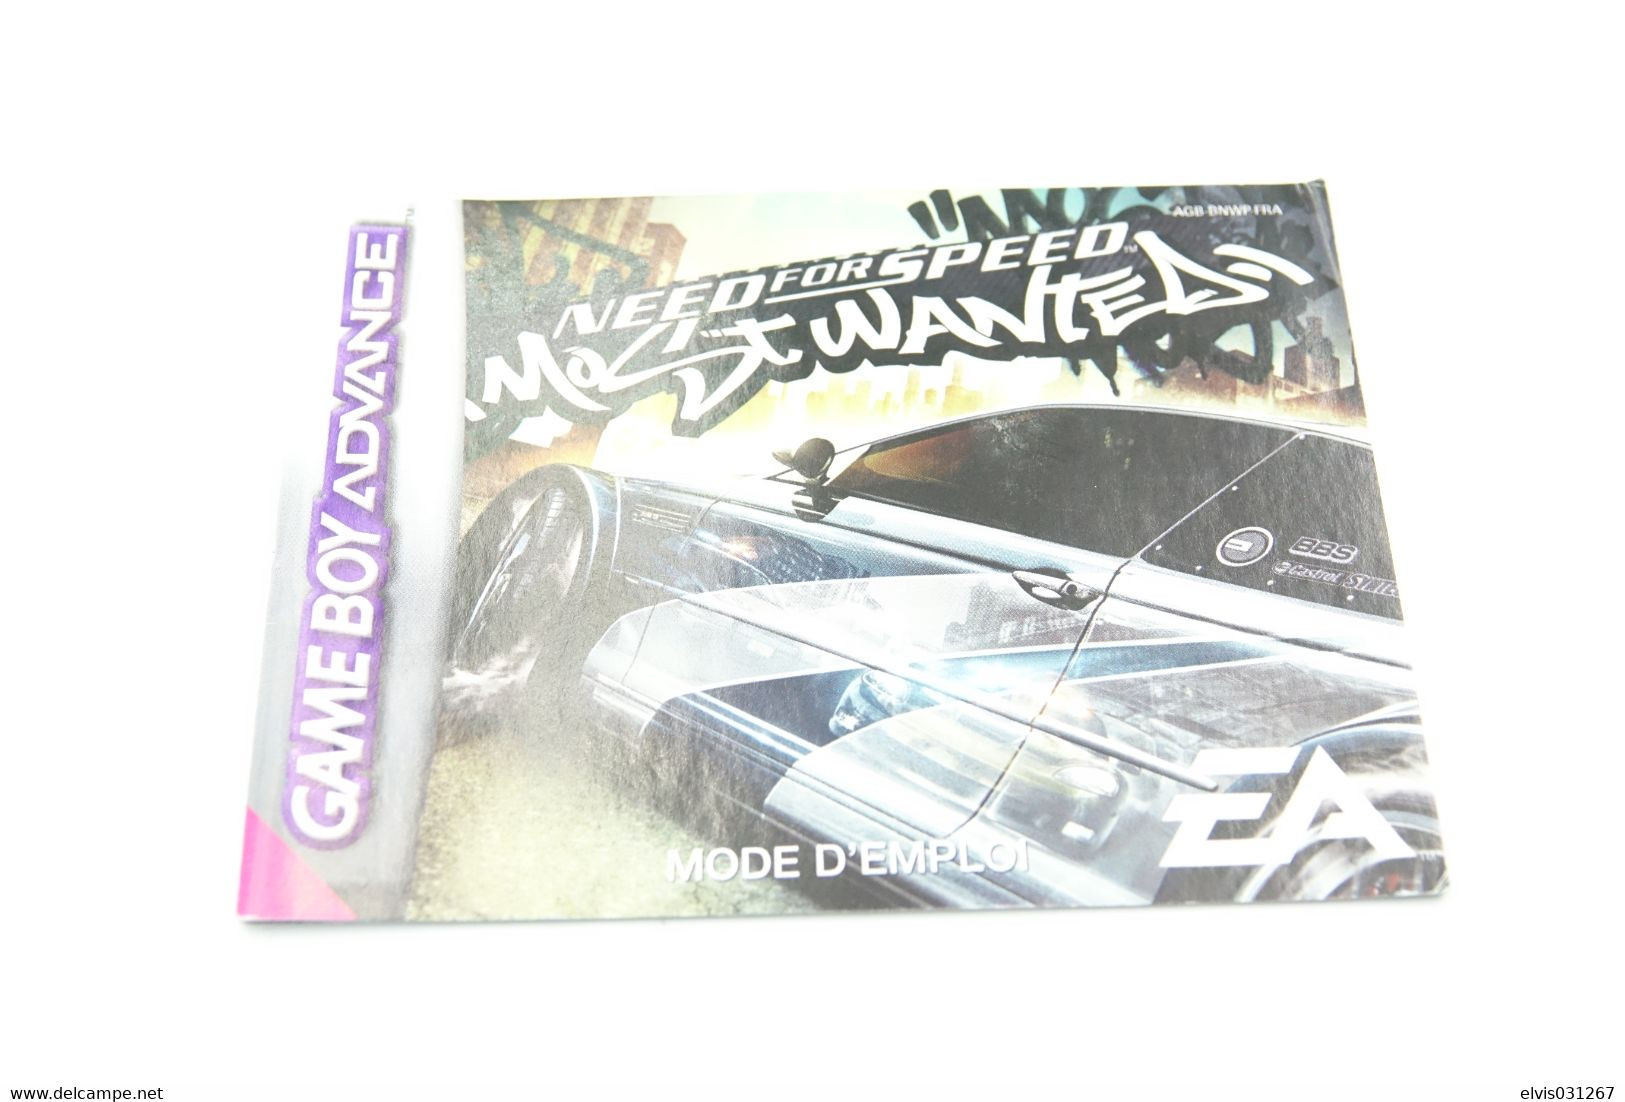 NINTENDO GAMEBOY ADVANCE: NEED FOR SPEED MOST WANTED WITH BOOKLET - EA - 2005 - Game Boy Advance